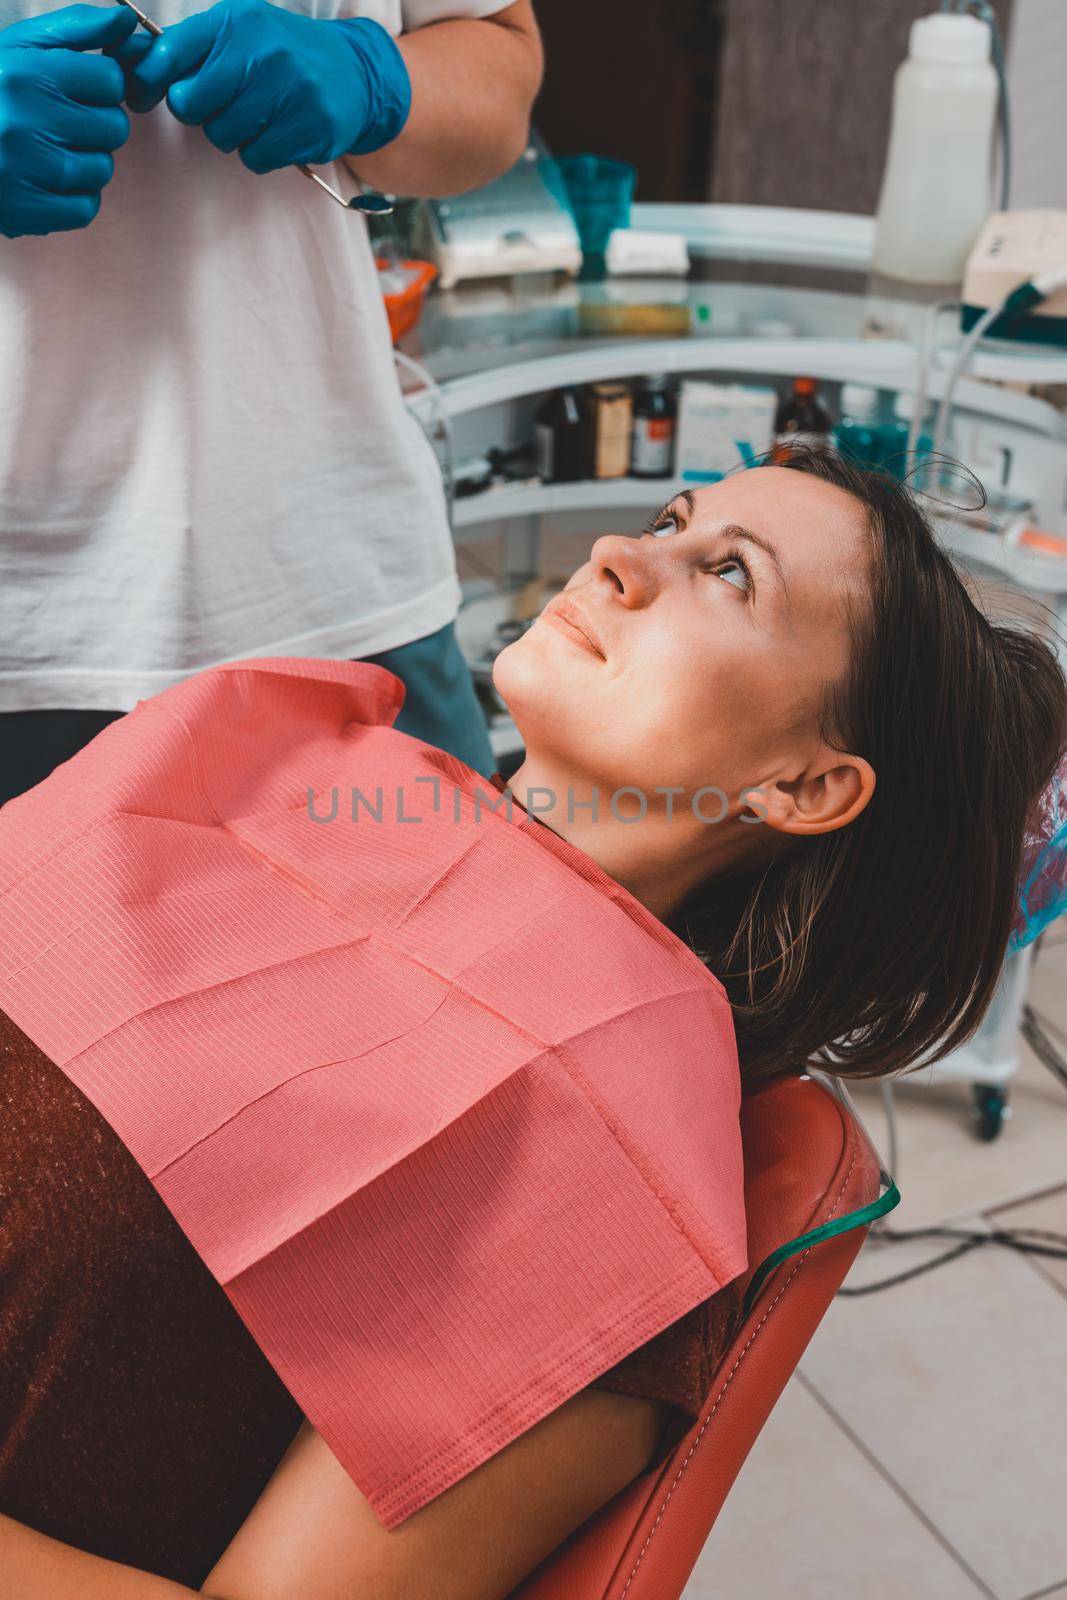 A young woman is preparing for a dental examination by a dentist, the patient is sitting in a dental chair. Happy patient in a dental chair 2021.